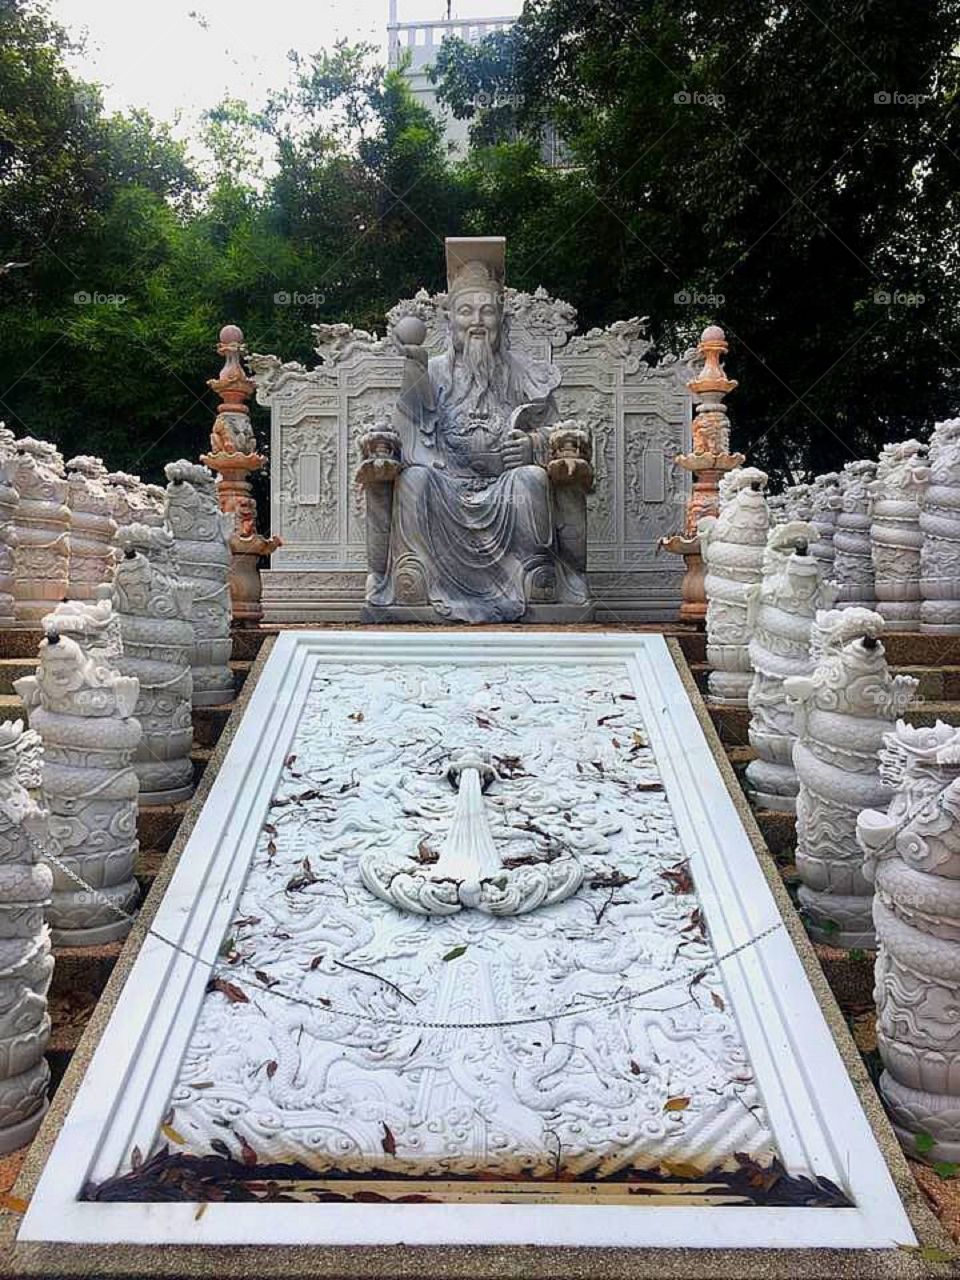 God of chinese statue.